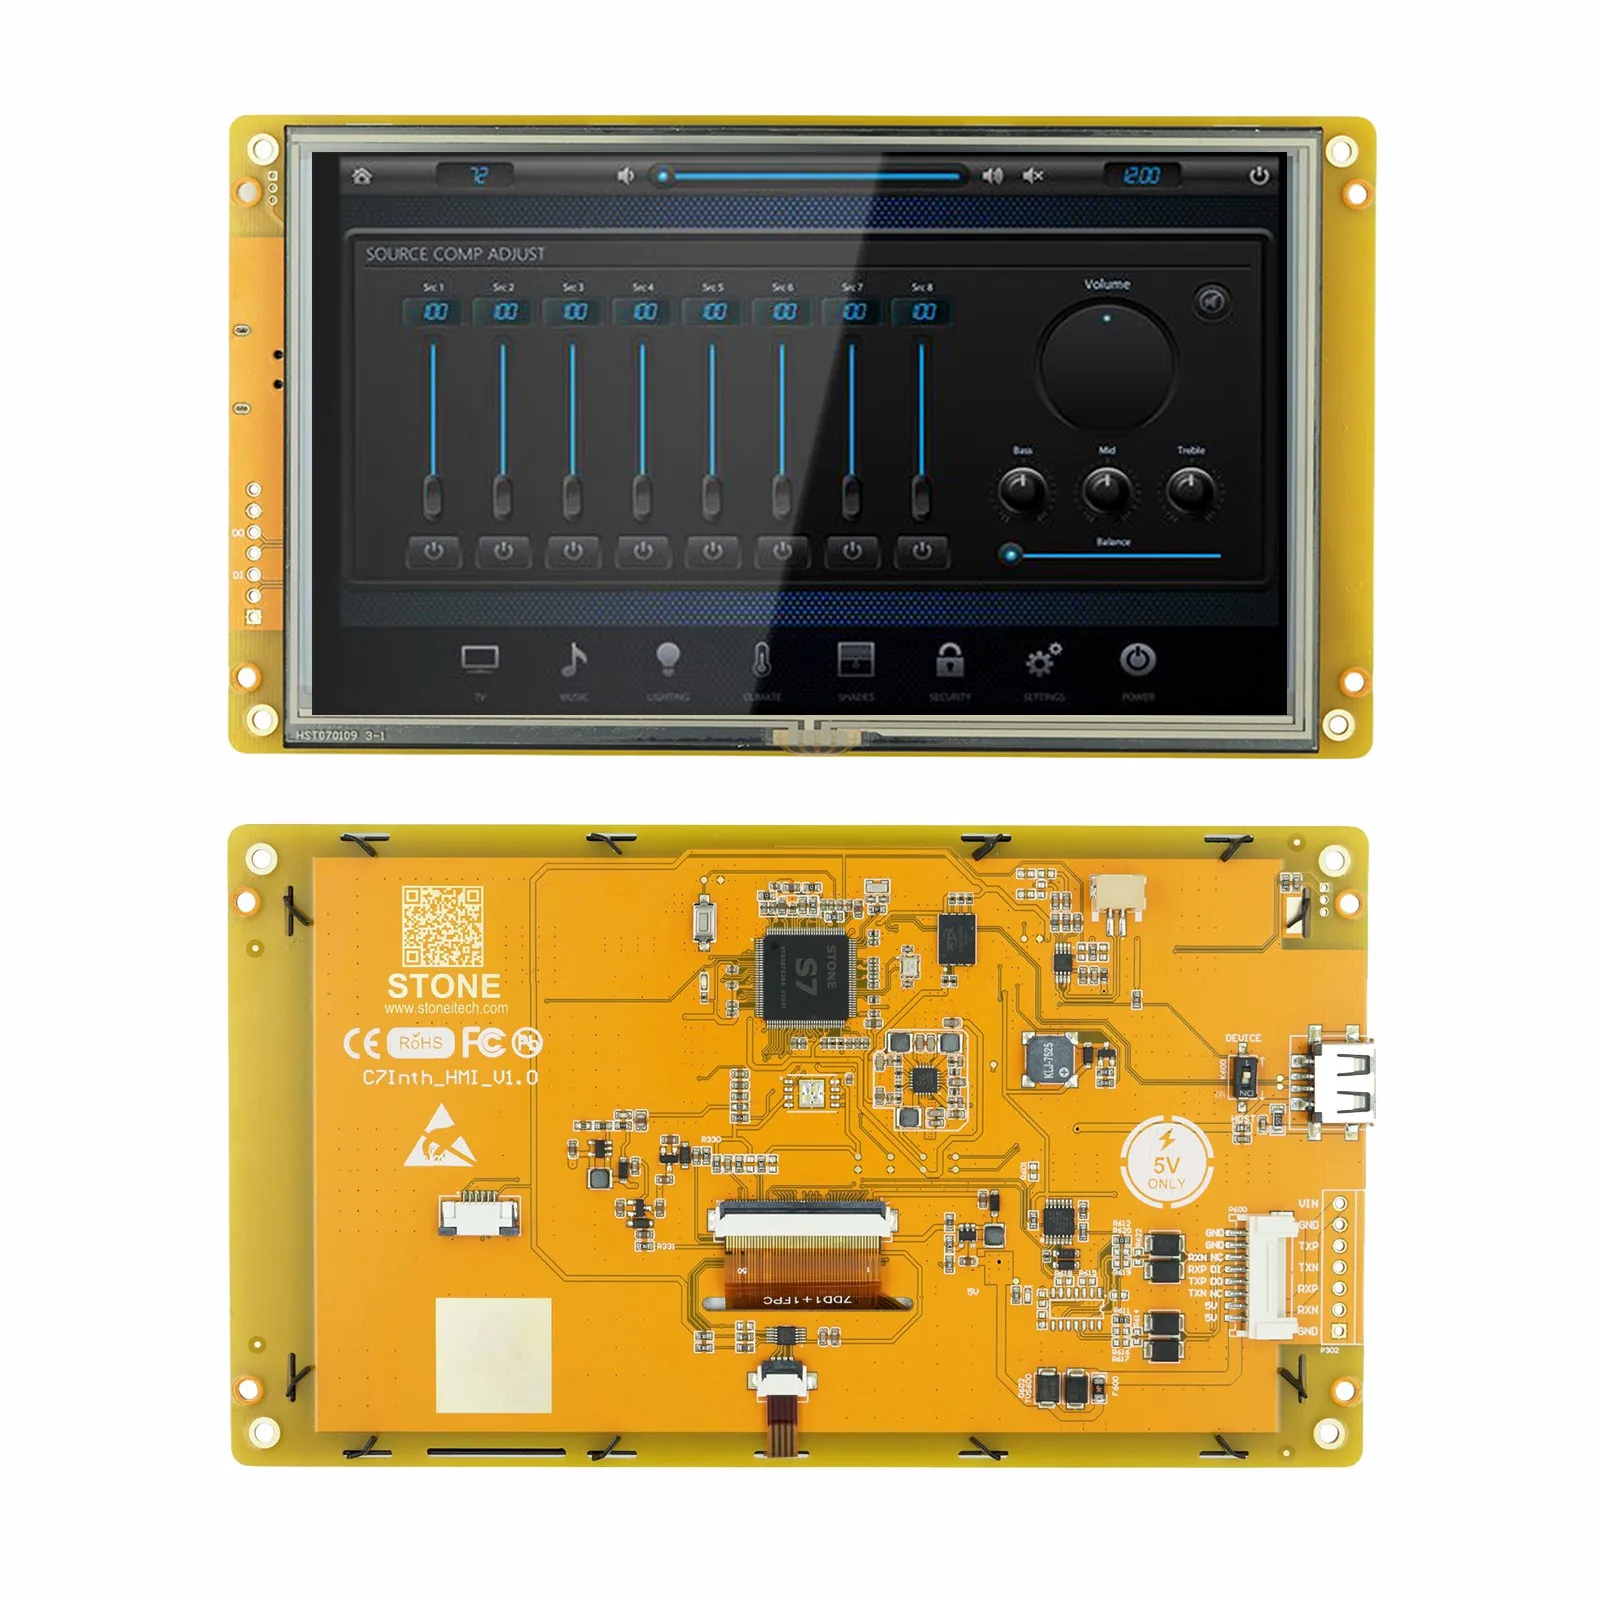 SCBRHMI 7 Inch LCD TFT HMI Display Module Intelligent Series RGB 65K Color Resistive Touch Panel Without Enclosure